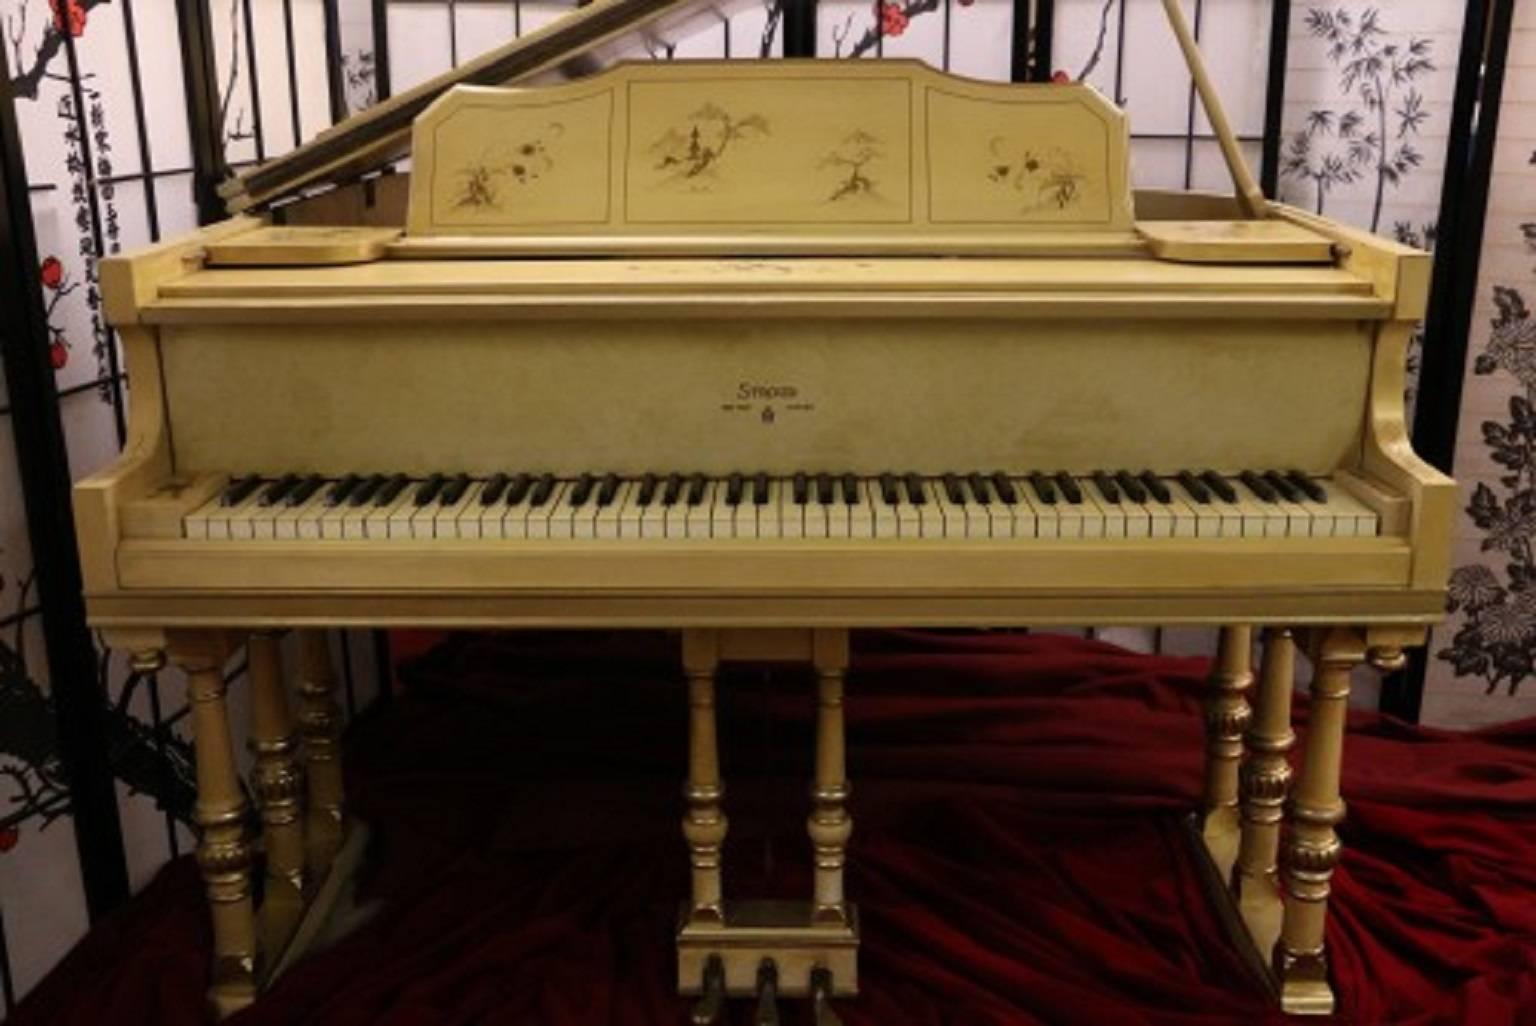 See and hear more about this magnificent piano on the VIDEO at the bottom of Sonny's Luxury Art Case Piano storefront homepage. 

Art case Stroud piano with beautiful hand-painted chinoiserie style landscape paintings representing peace,